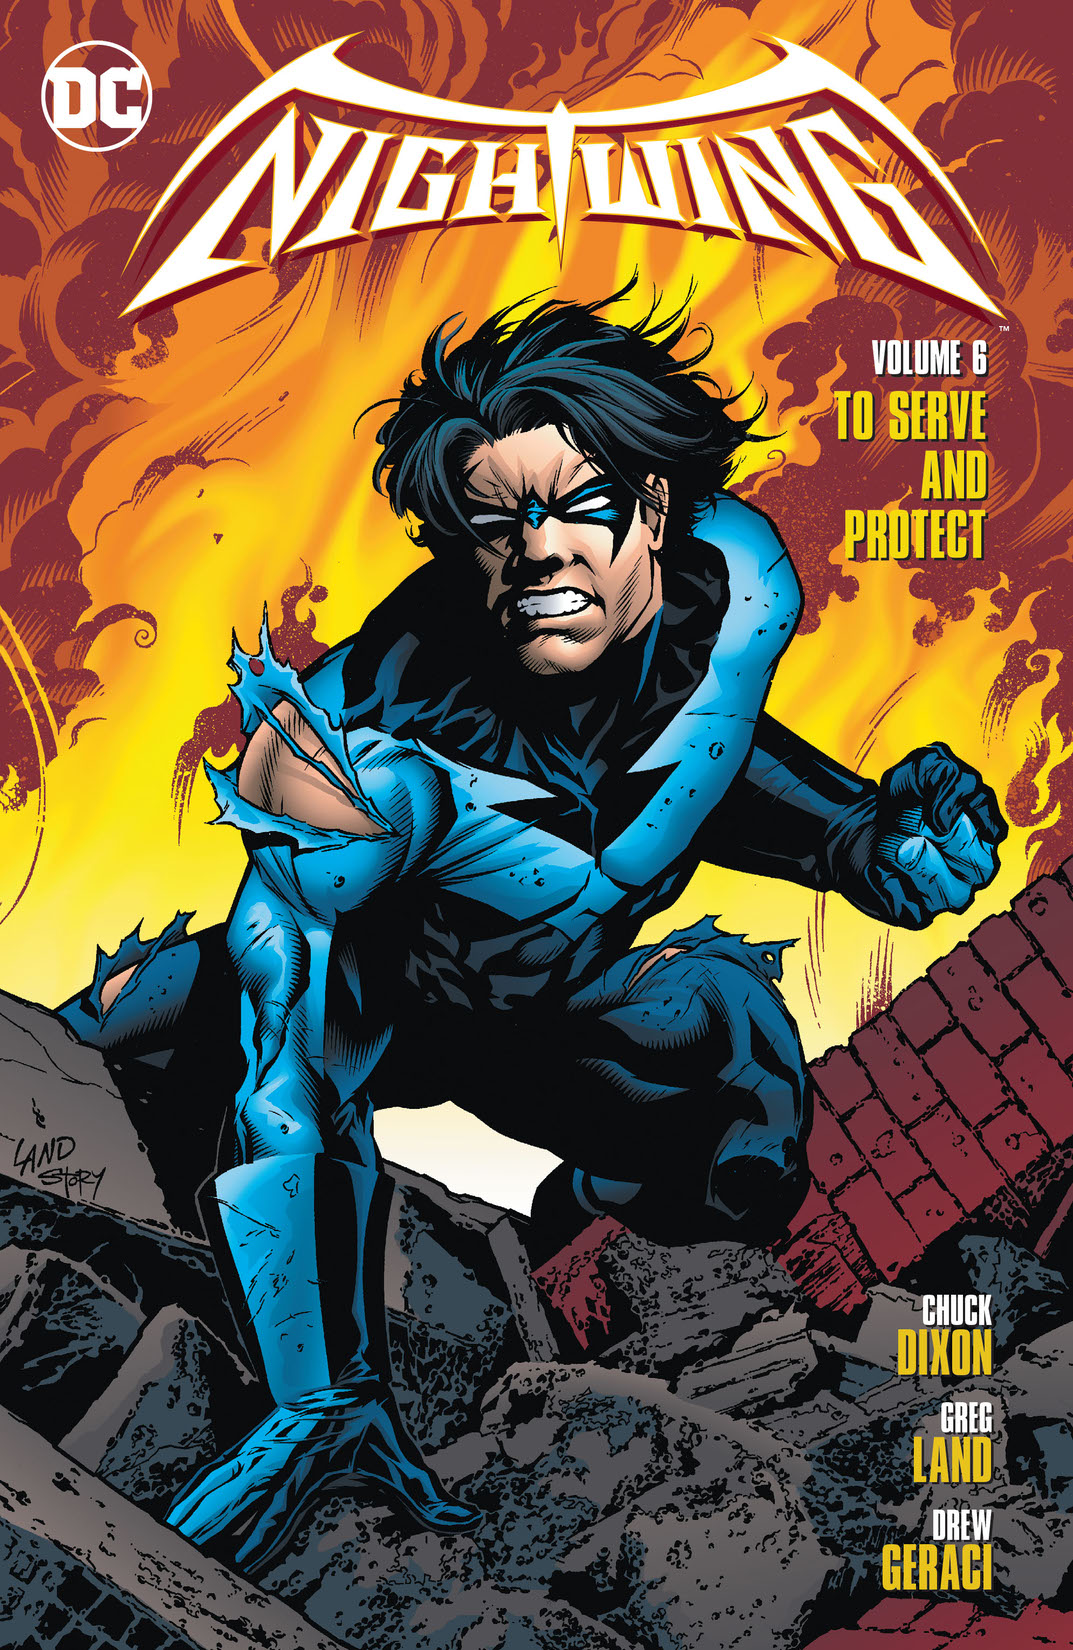 Nightwing Vol. 6: To Serve and Protect preview images